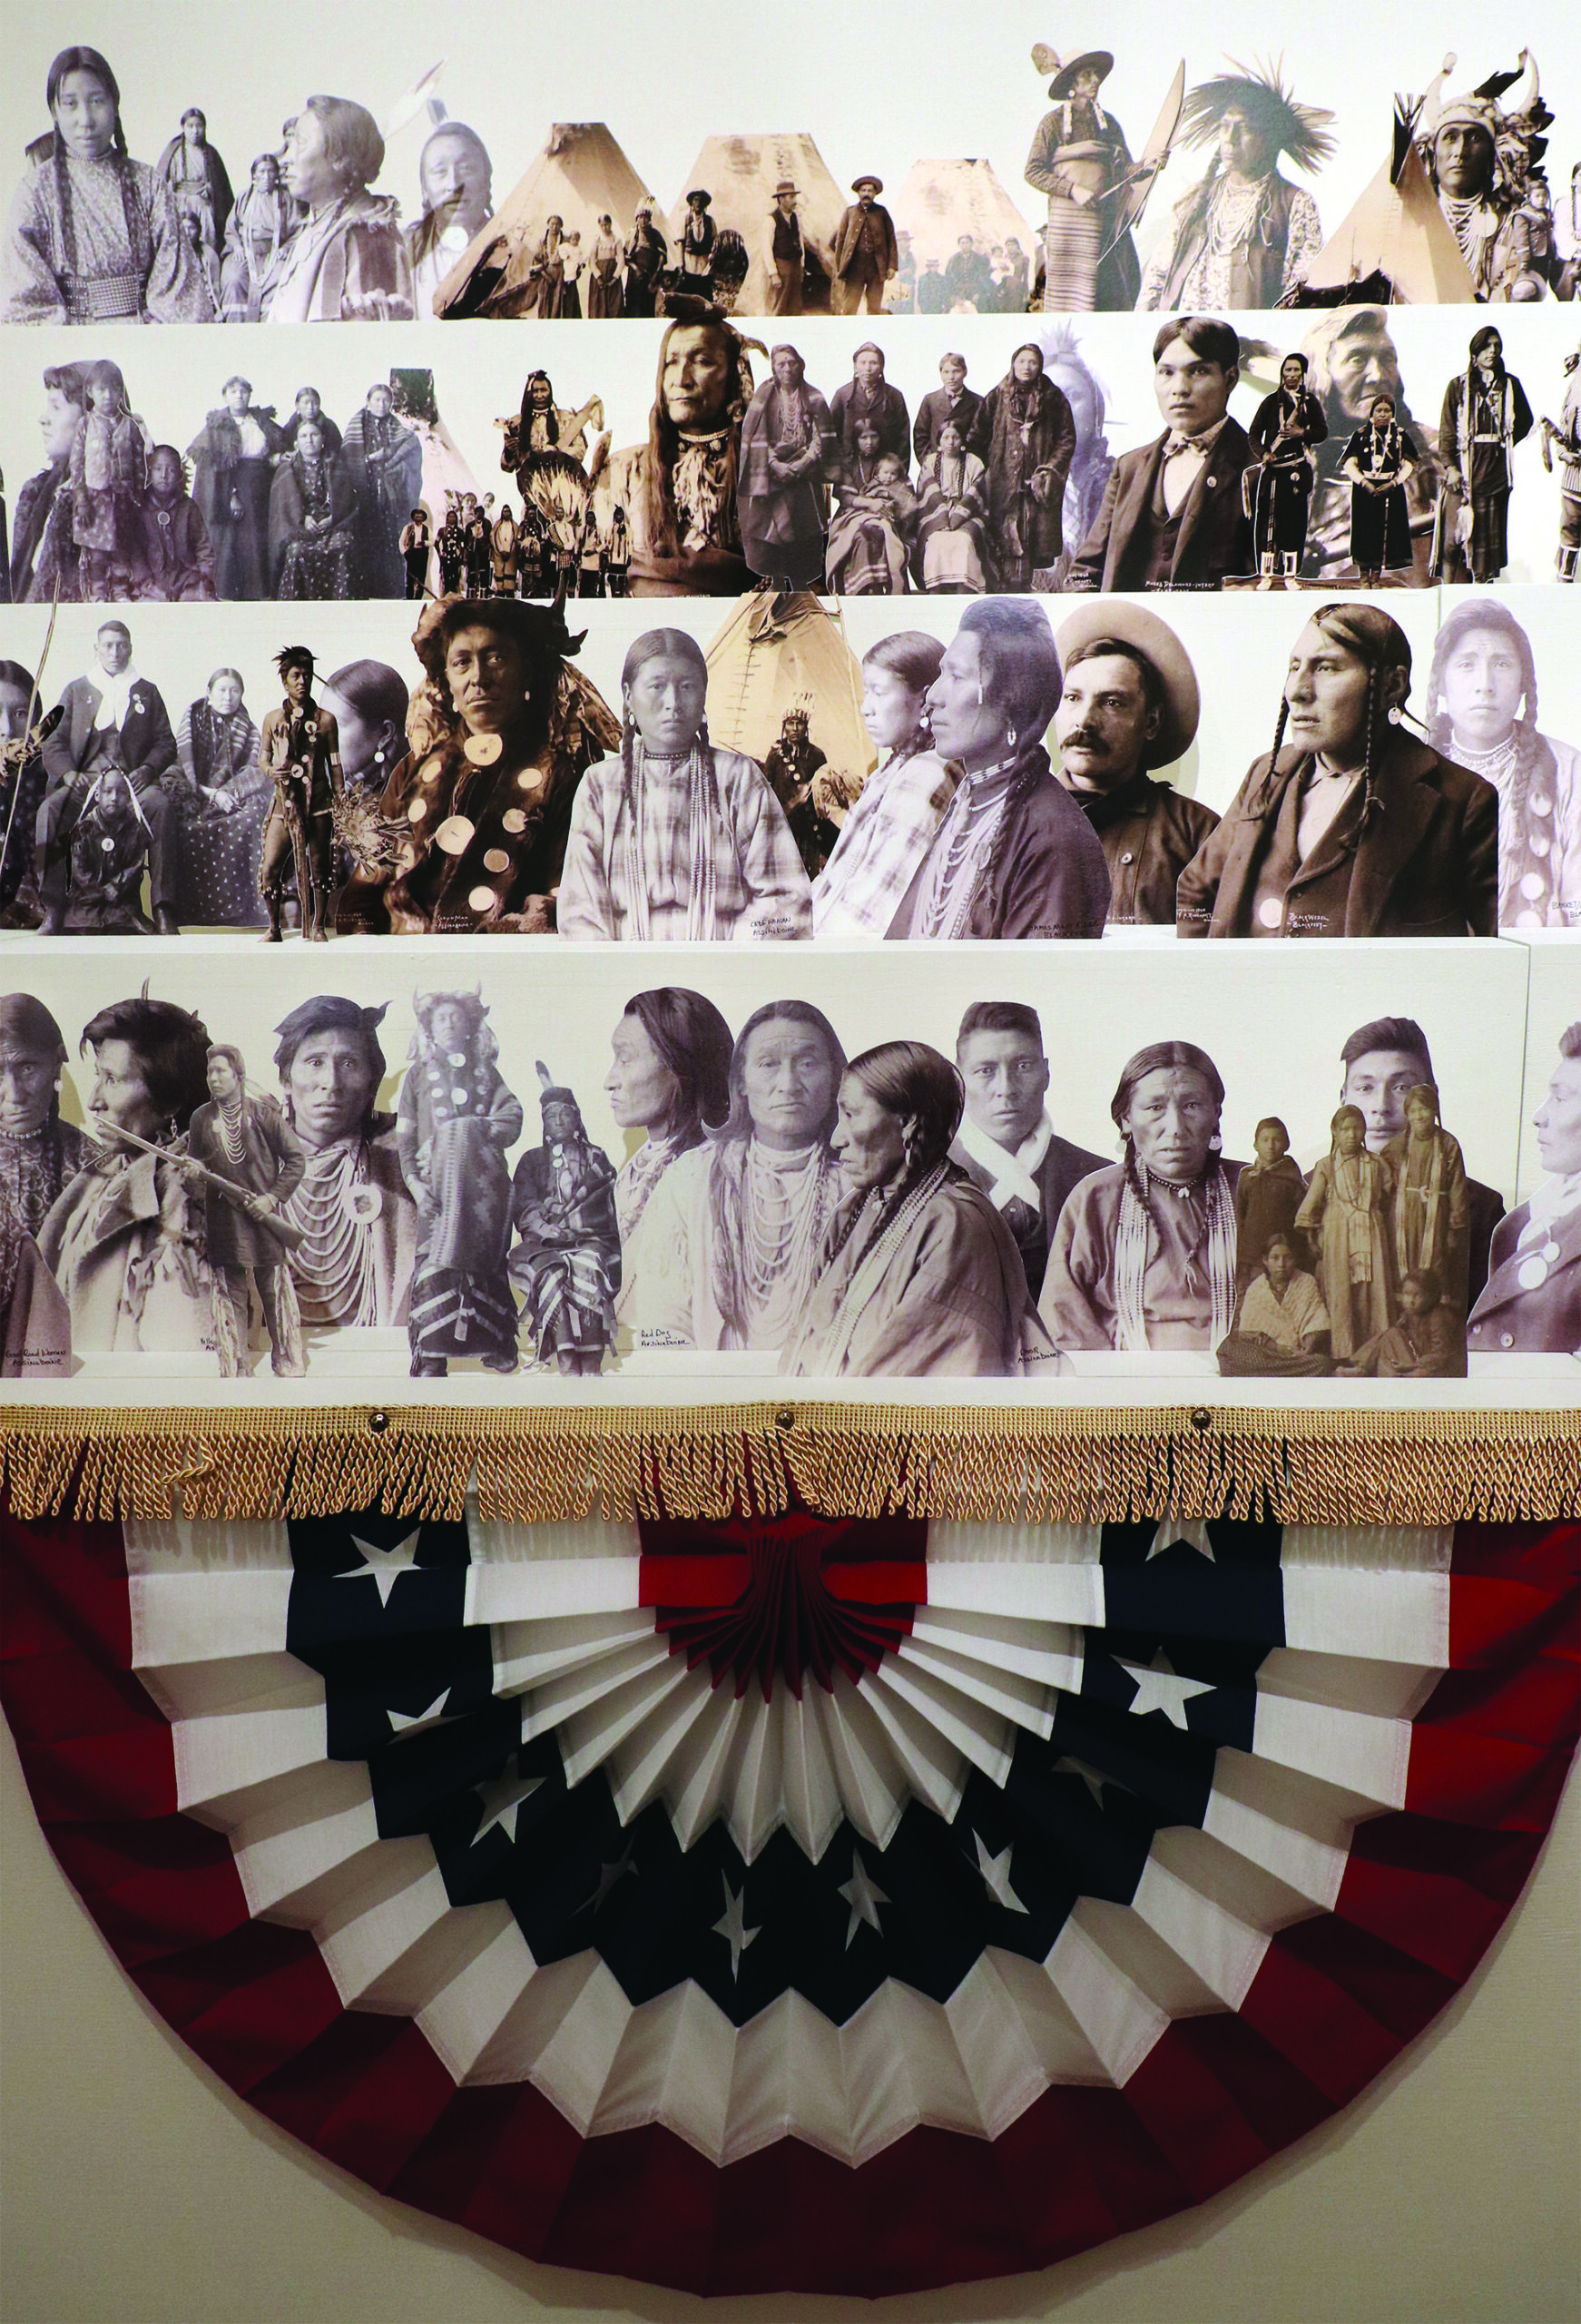 Part of Wendy Red Star's installation she is decolonizing the image with black and white images of Native Americans in rows above festive American banners of red, white and blue